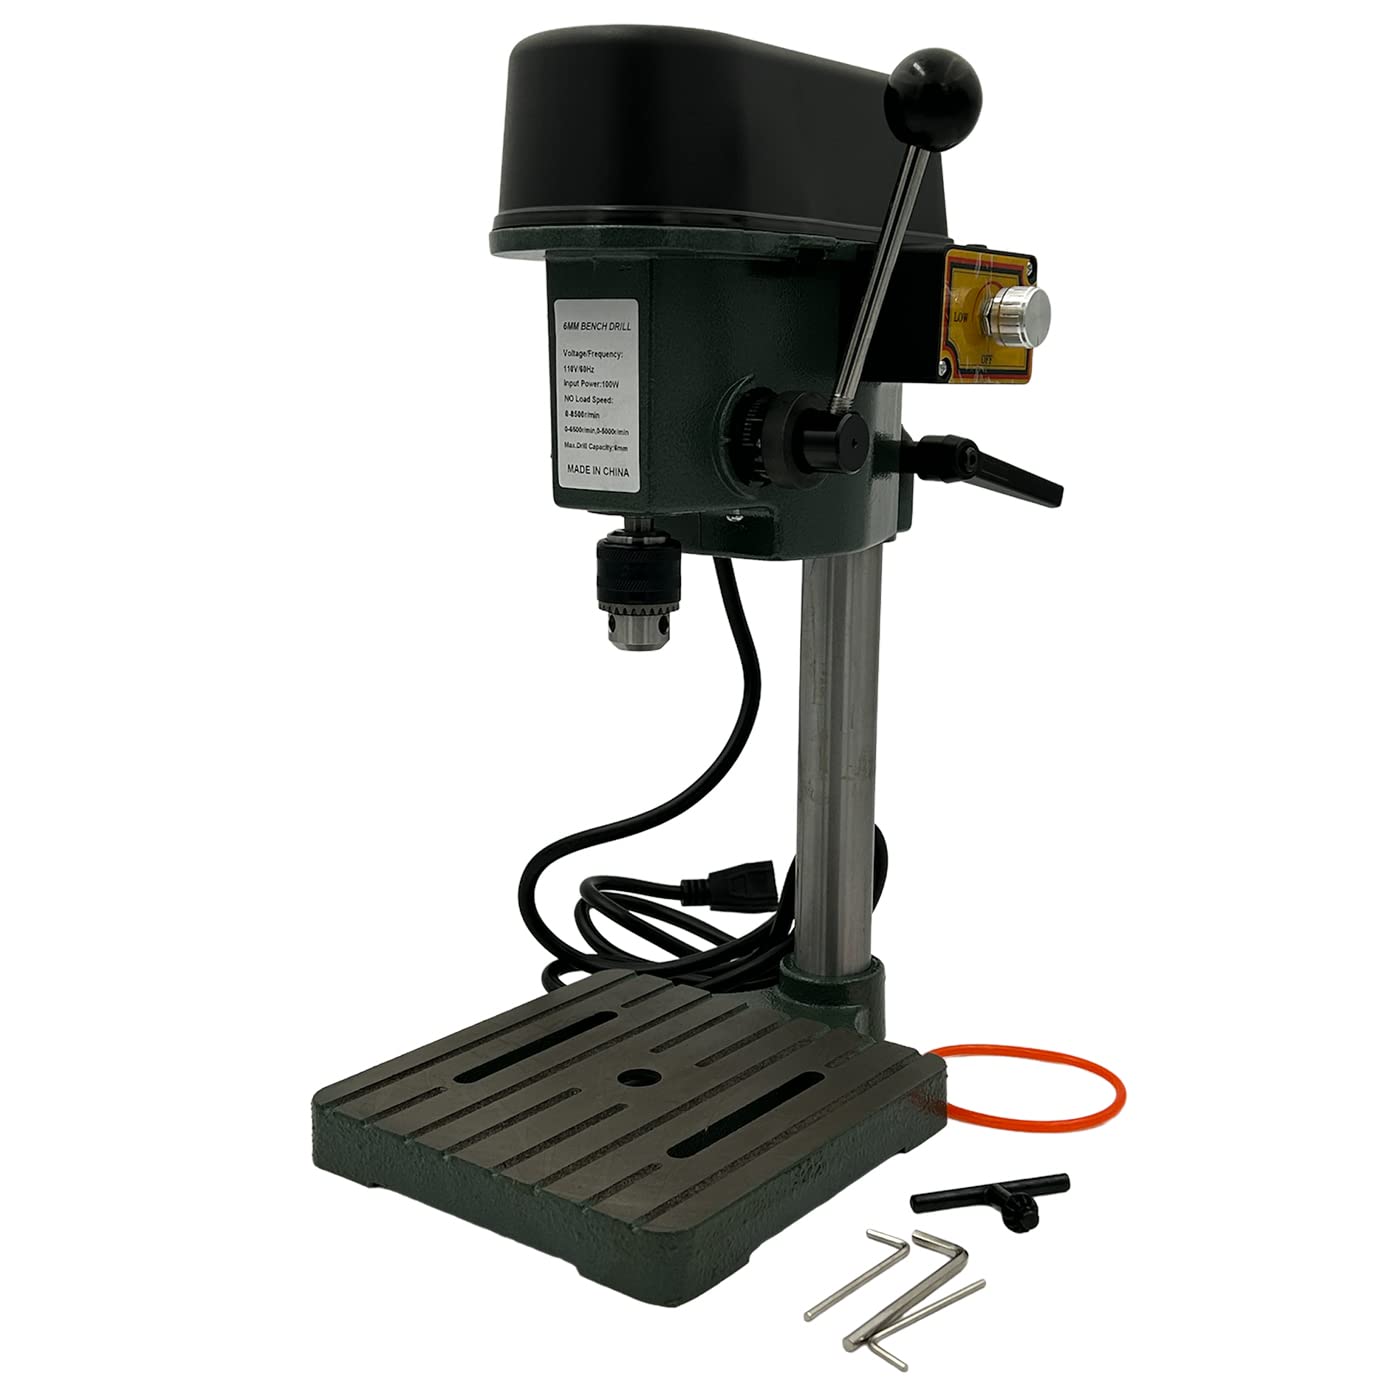 Small Benchtop Drill Press, 3 Speed | DRL-300.00